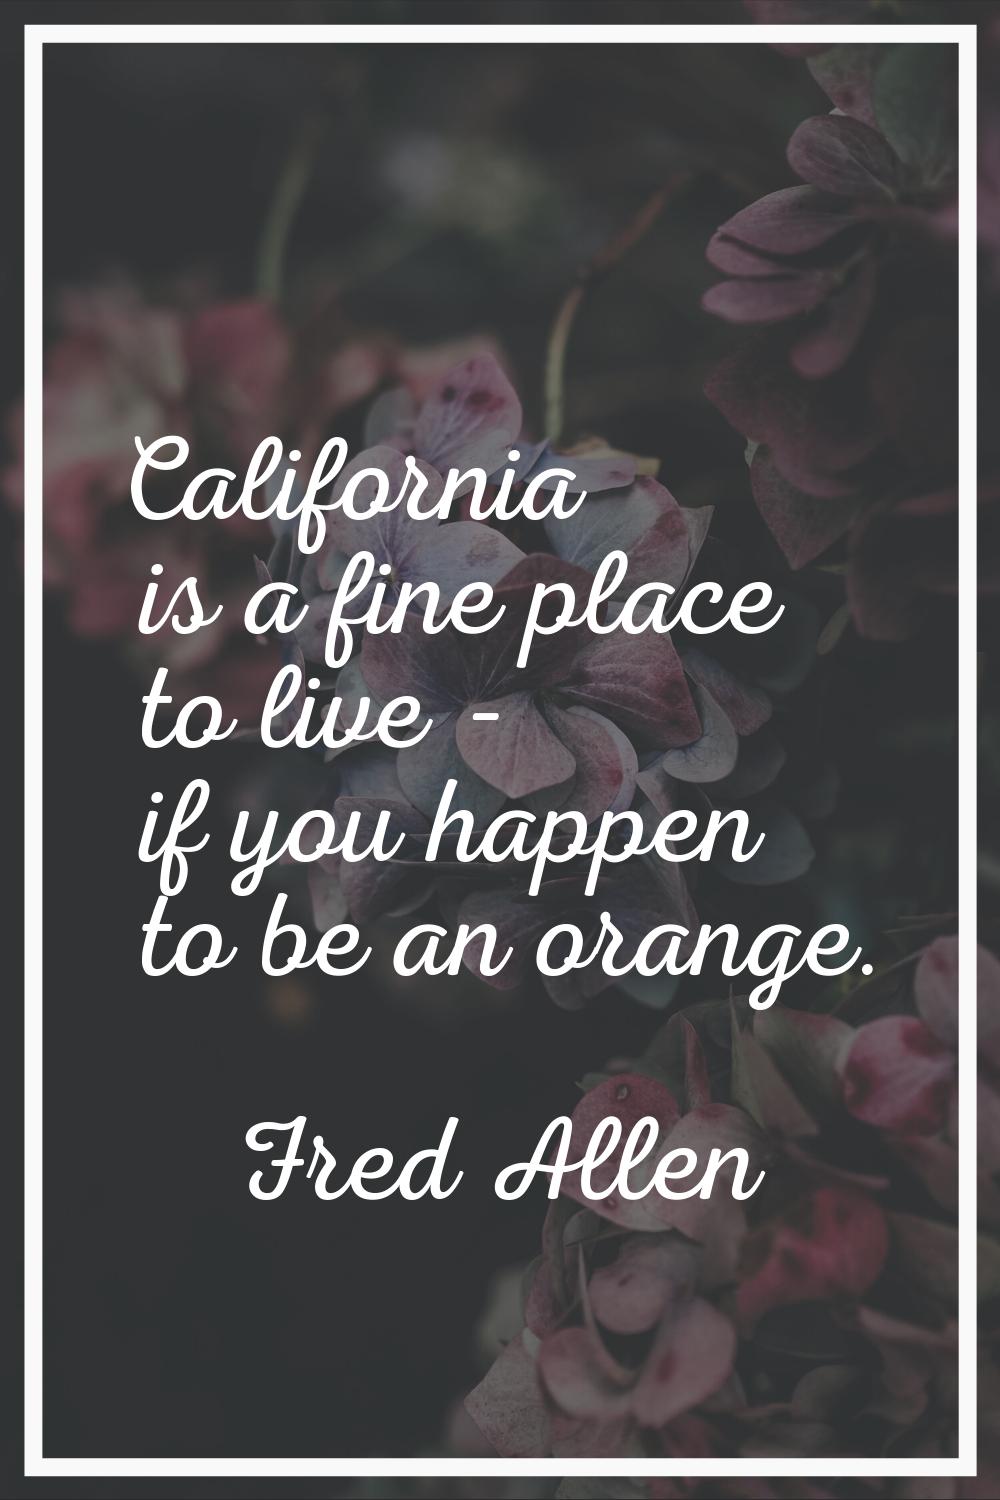 California is a fine place to live - if you happen to be an orange.